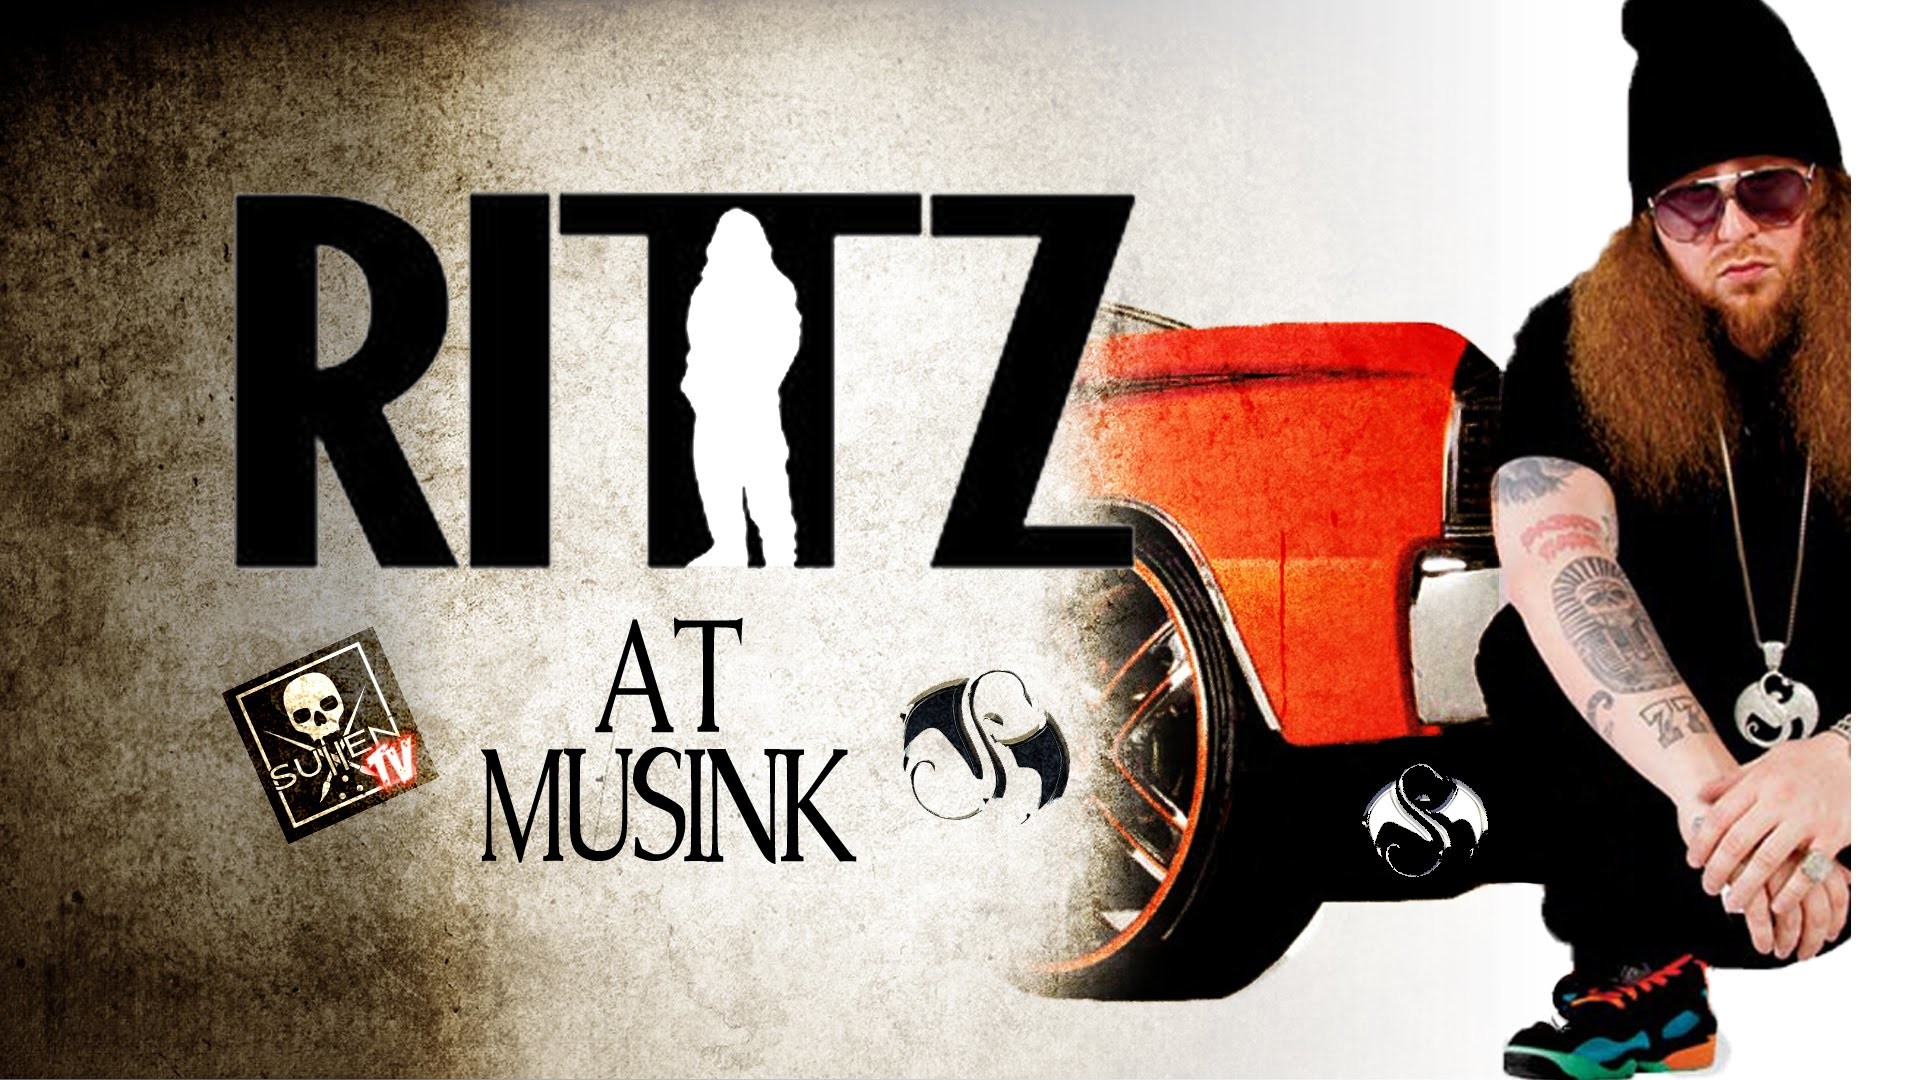 1920x1080 Rittz Interview & Performance At Musink Faygoluvers